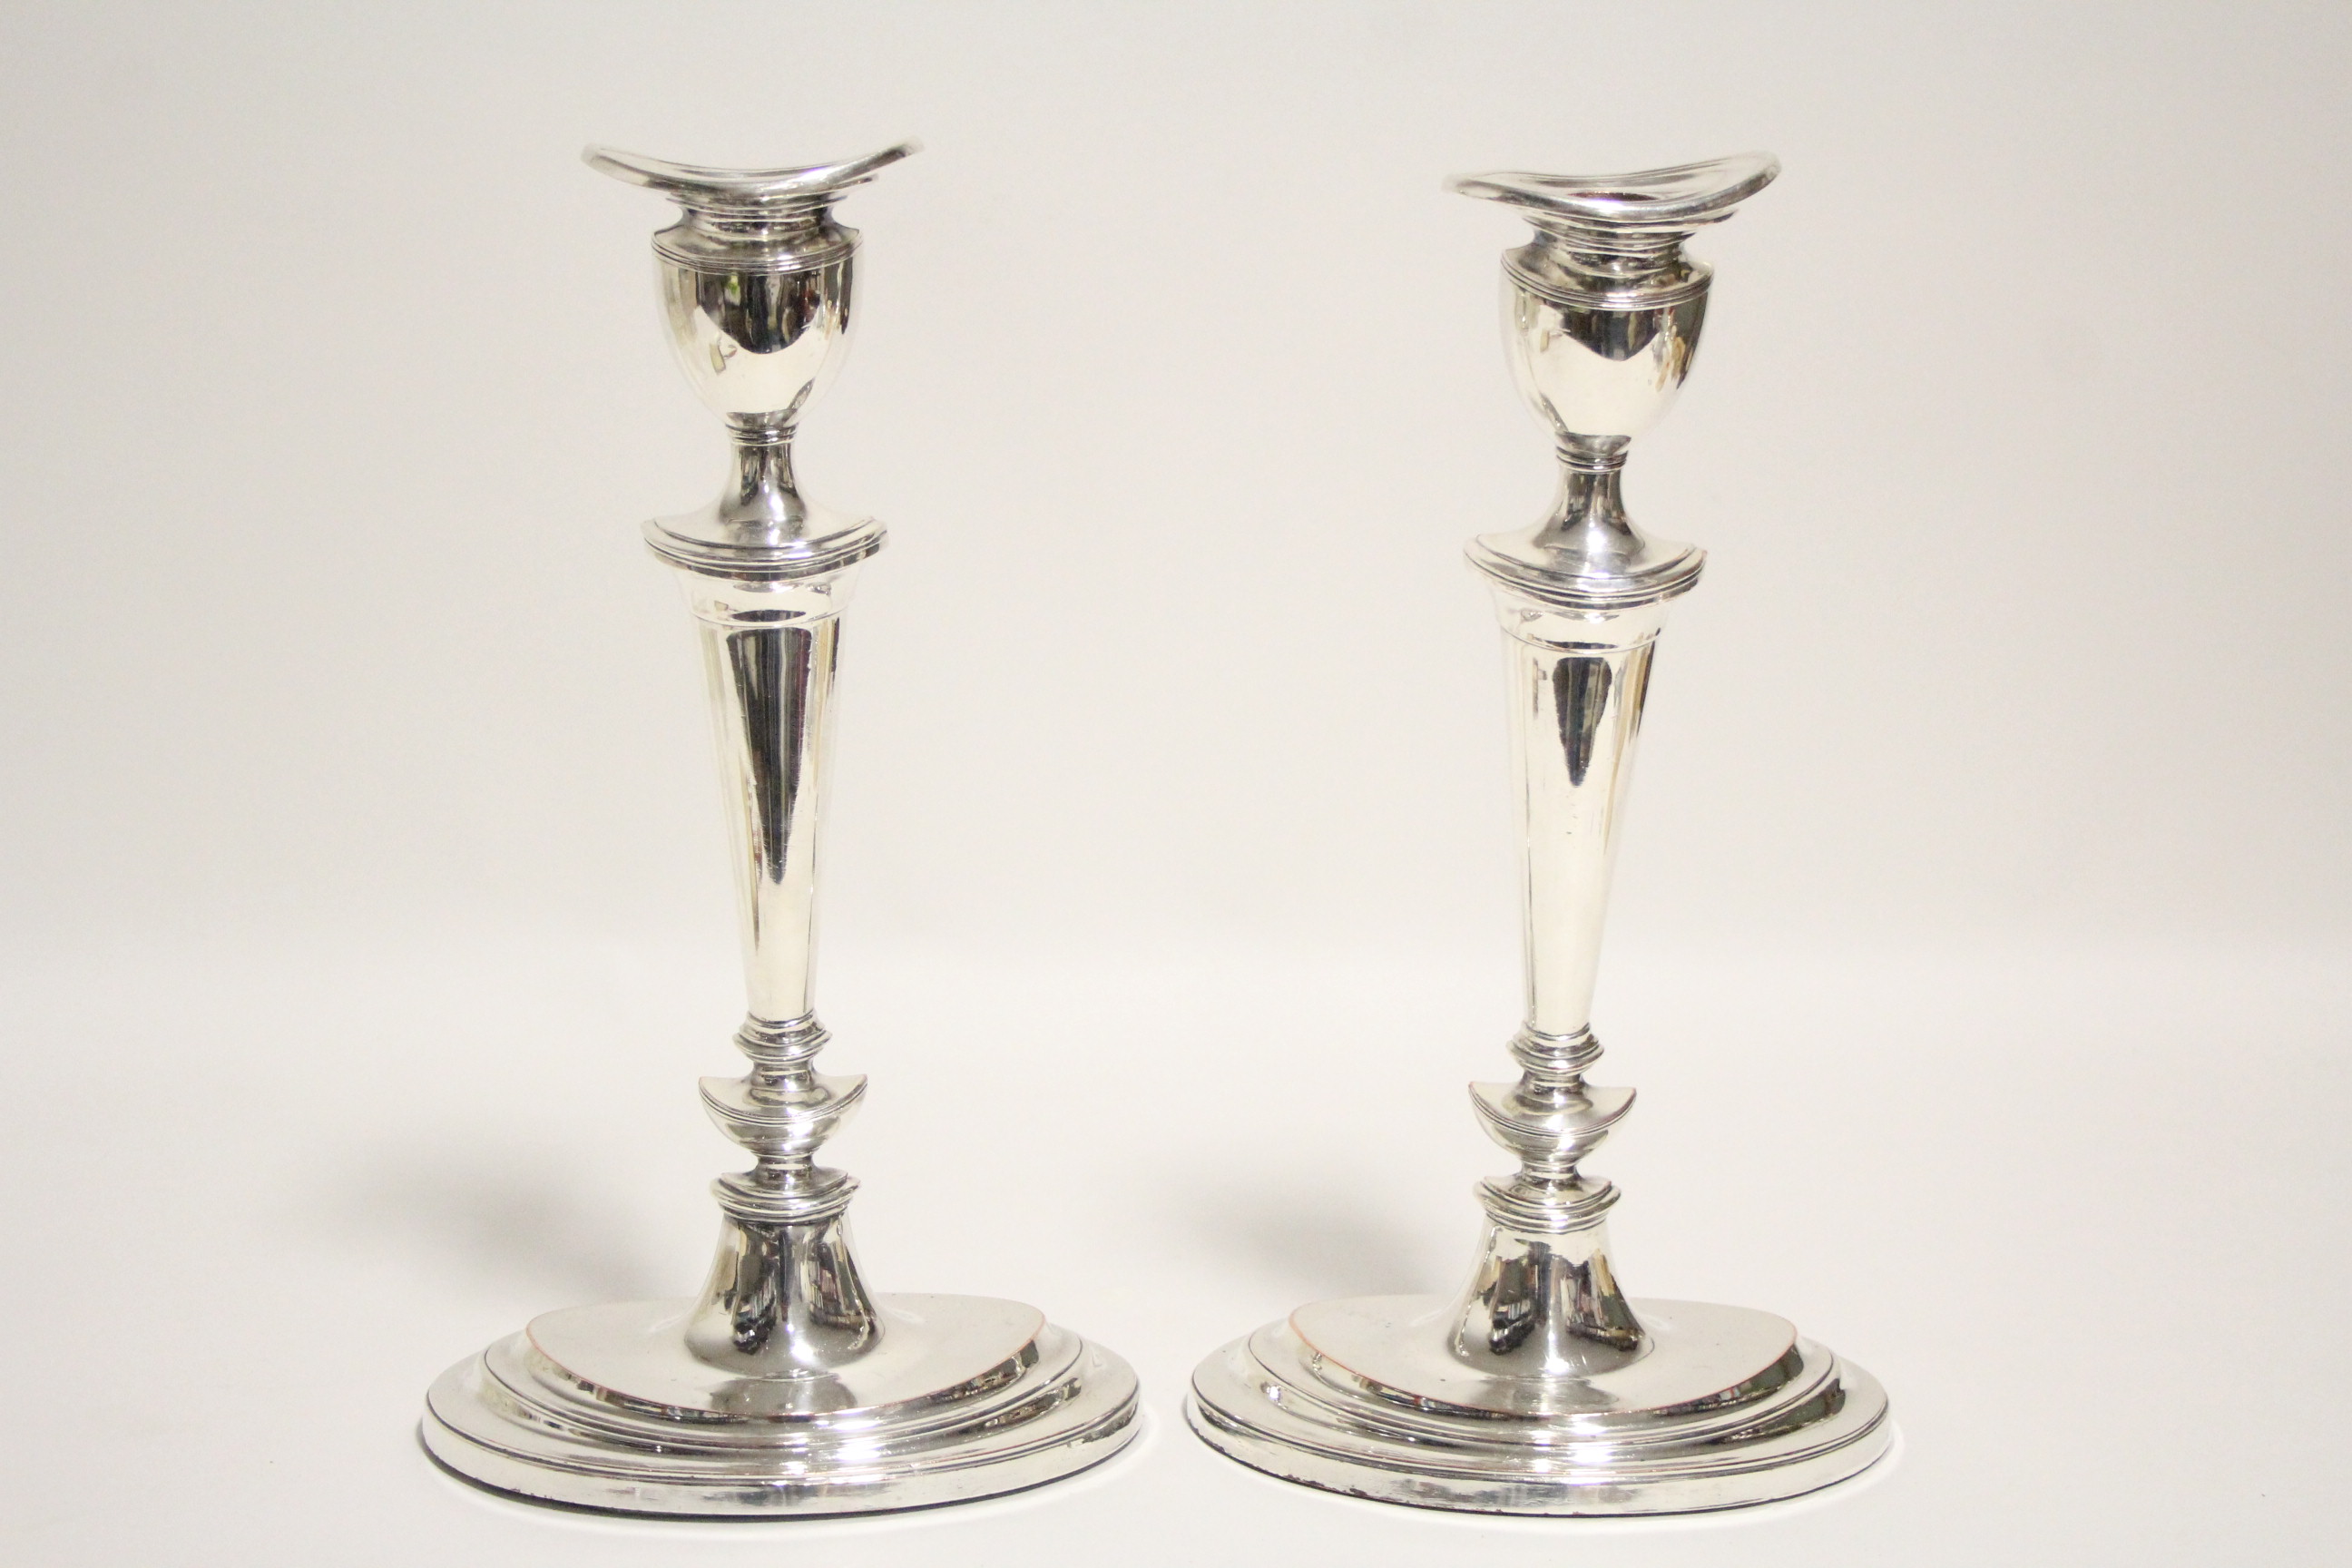 A pair of late 18th century style candlesticks with oval tapered columns, removable drip-pans to the